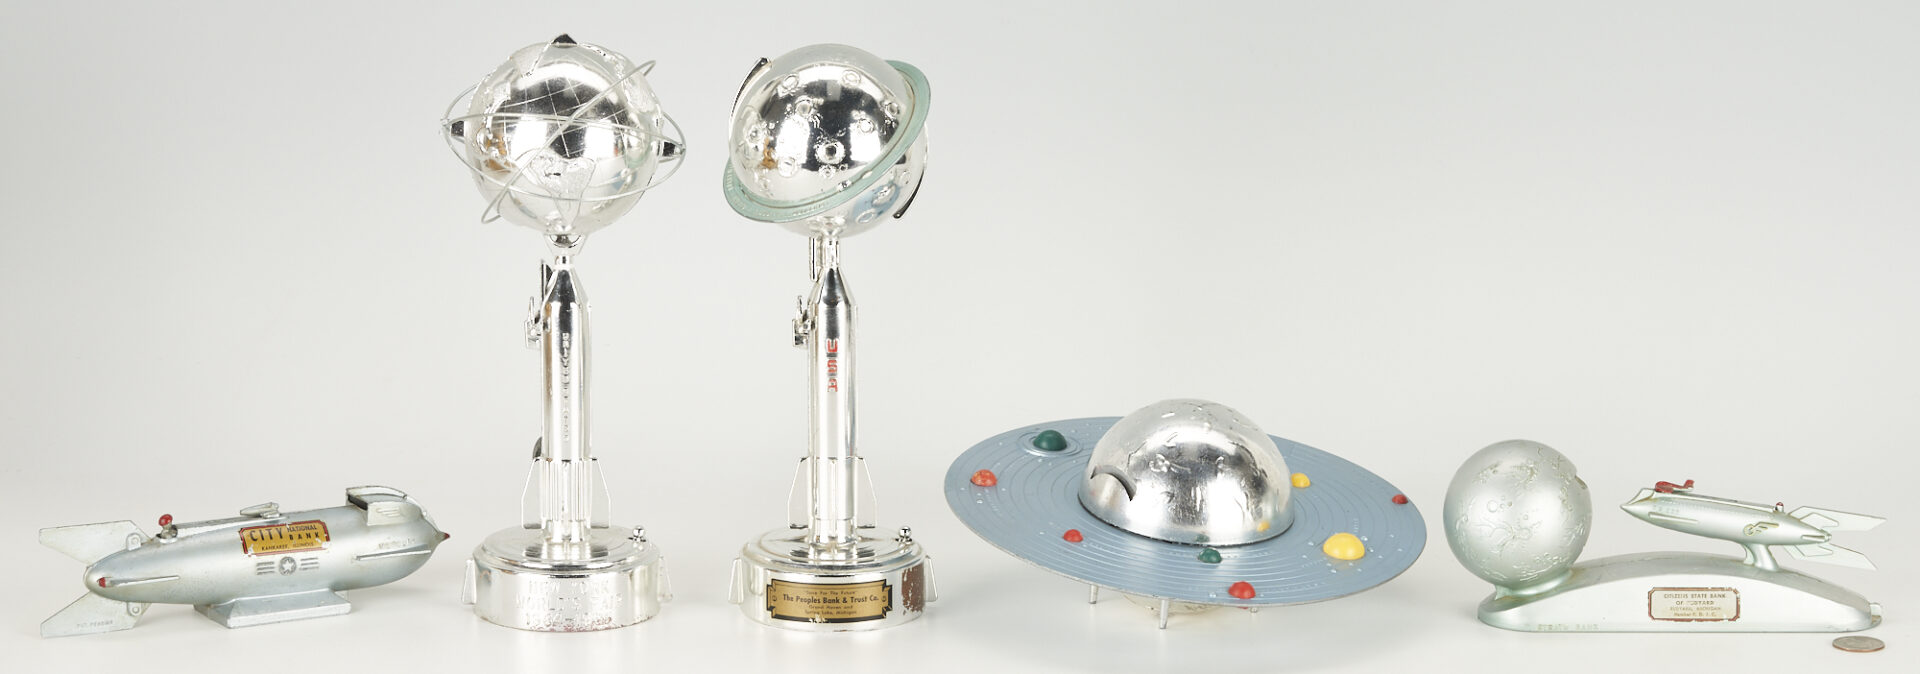 Lot 186: 5 Vintage Space Age Themed Banks